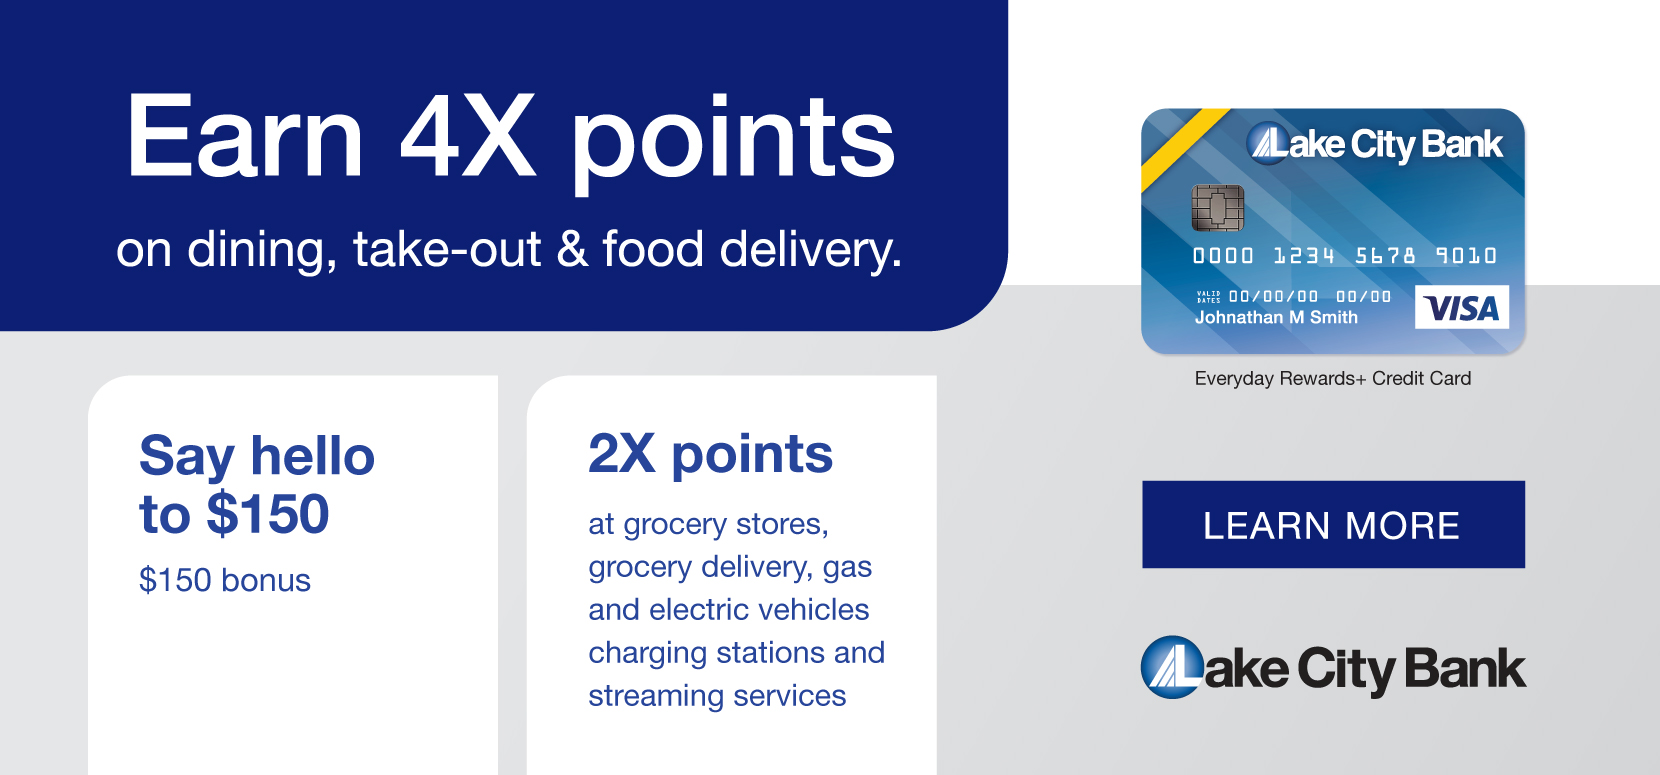 Credit Card Offer 4x points on select purchases.